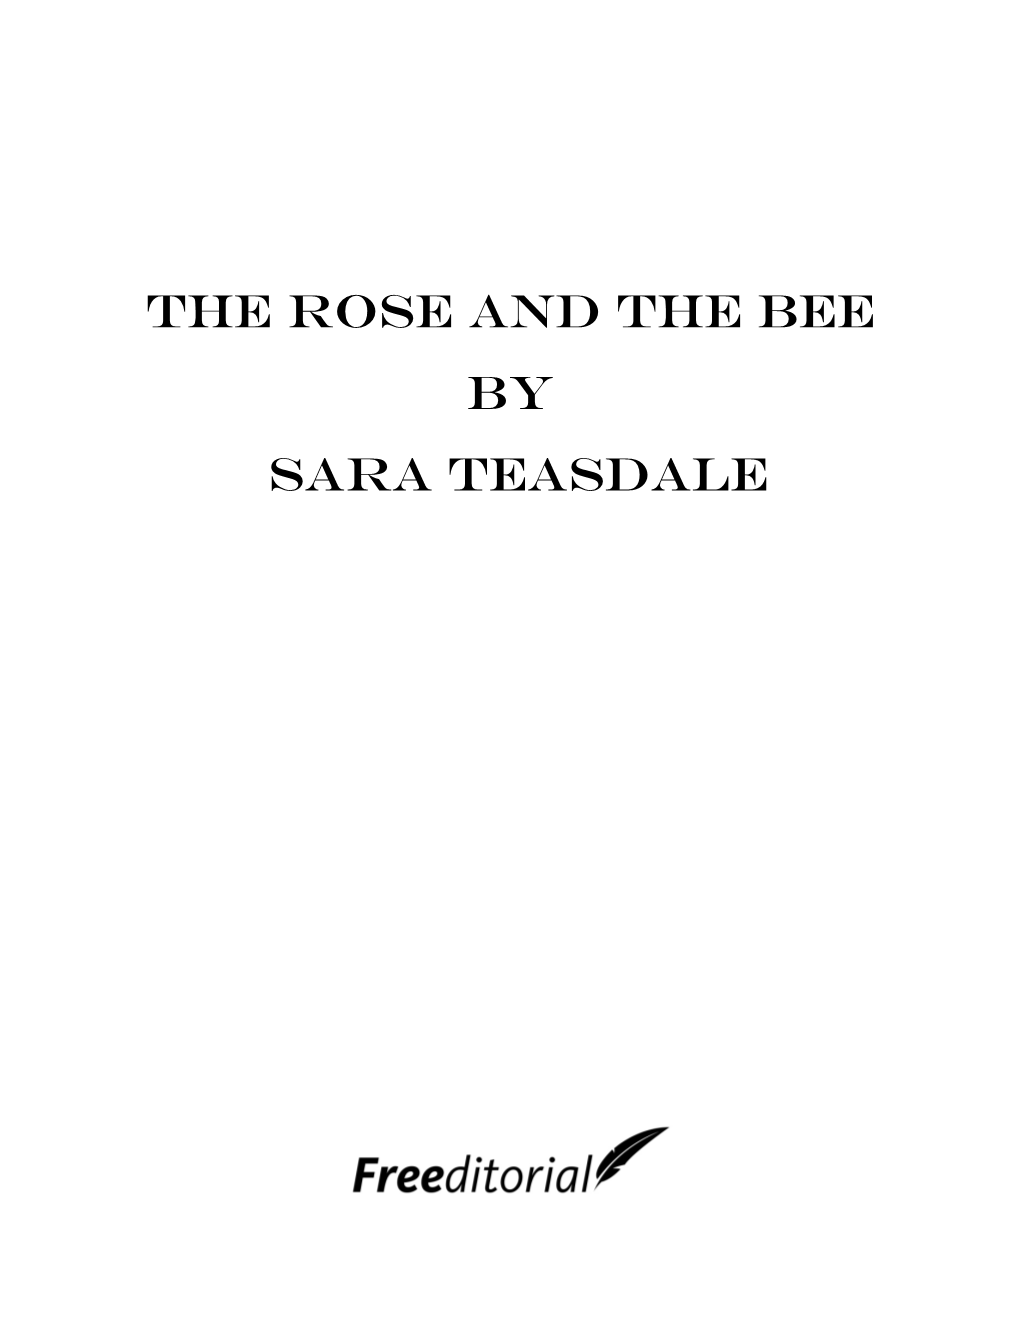 The Rose and the Bee by Sara Teasdale